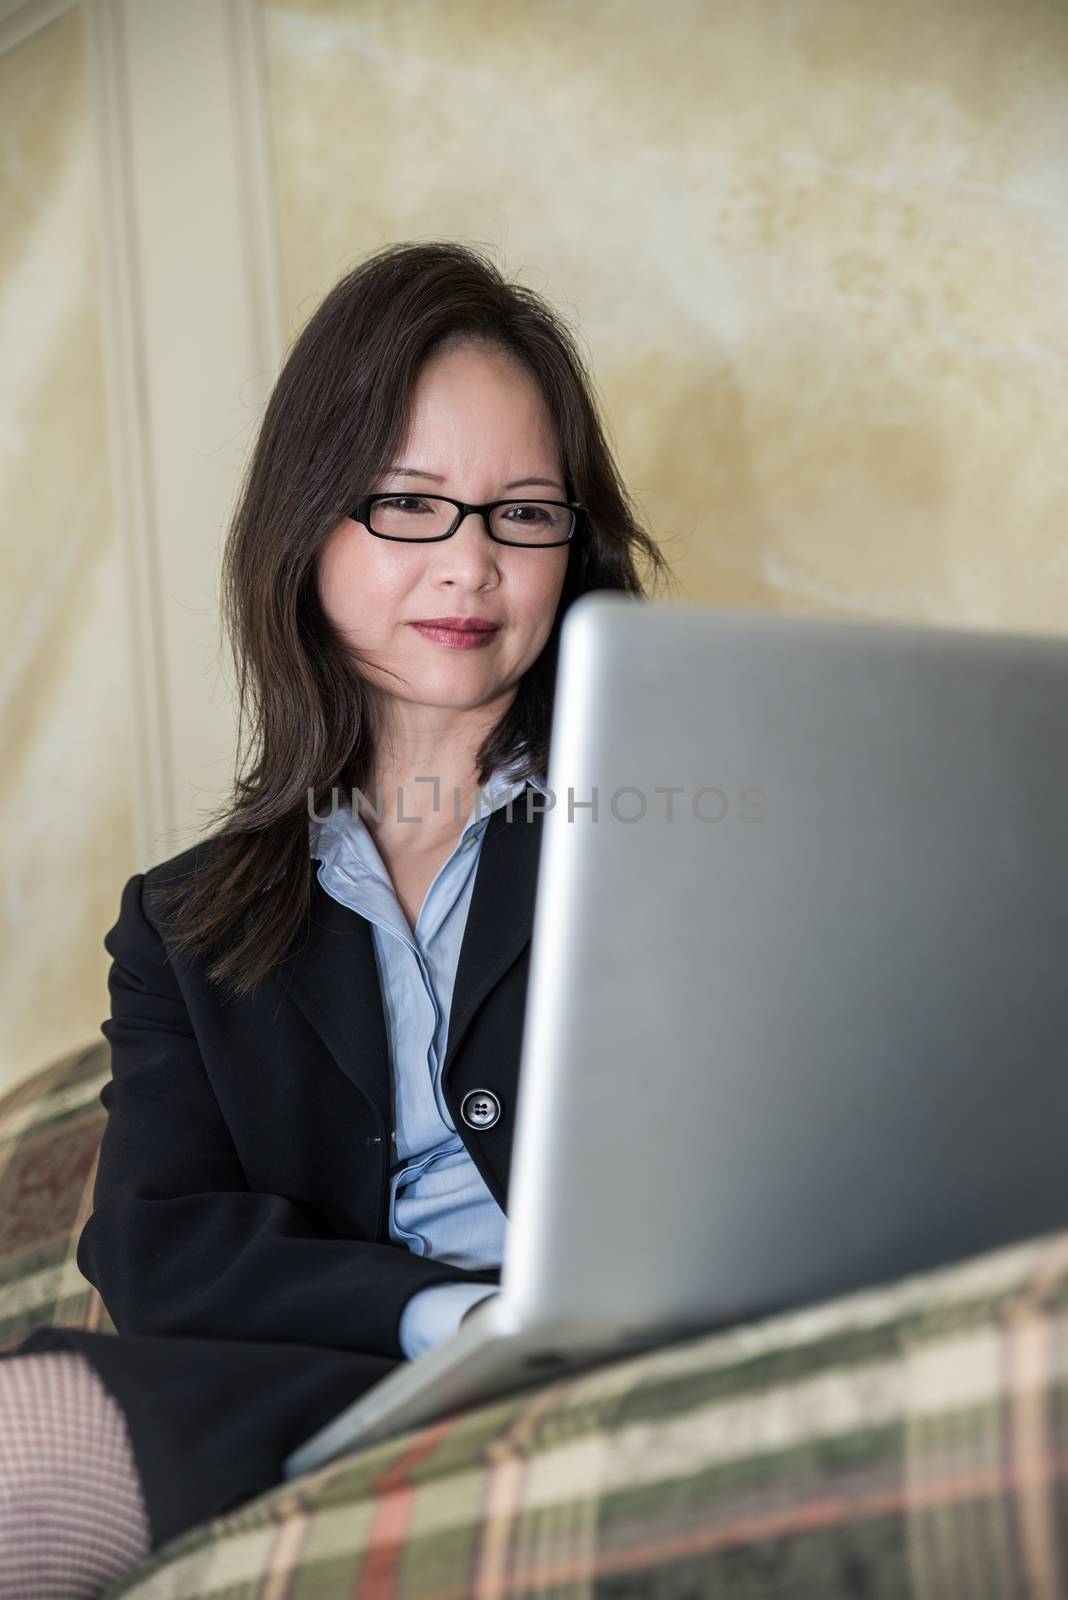 Woman on sofa on laptop by IVYPHOTOS